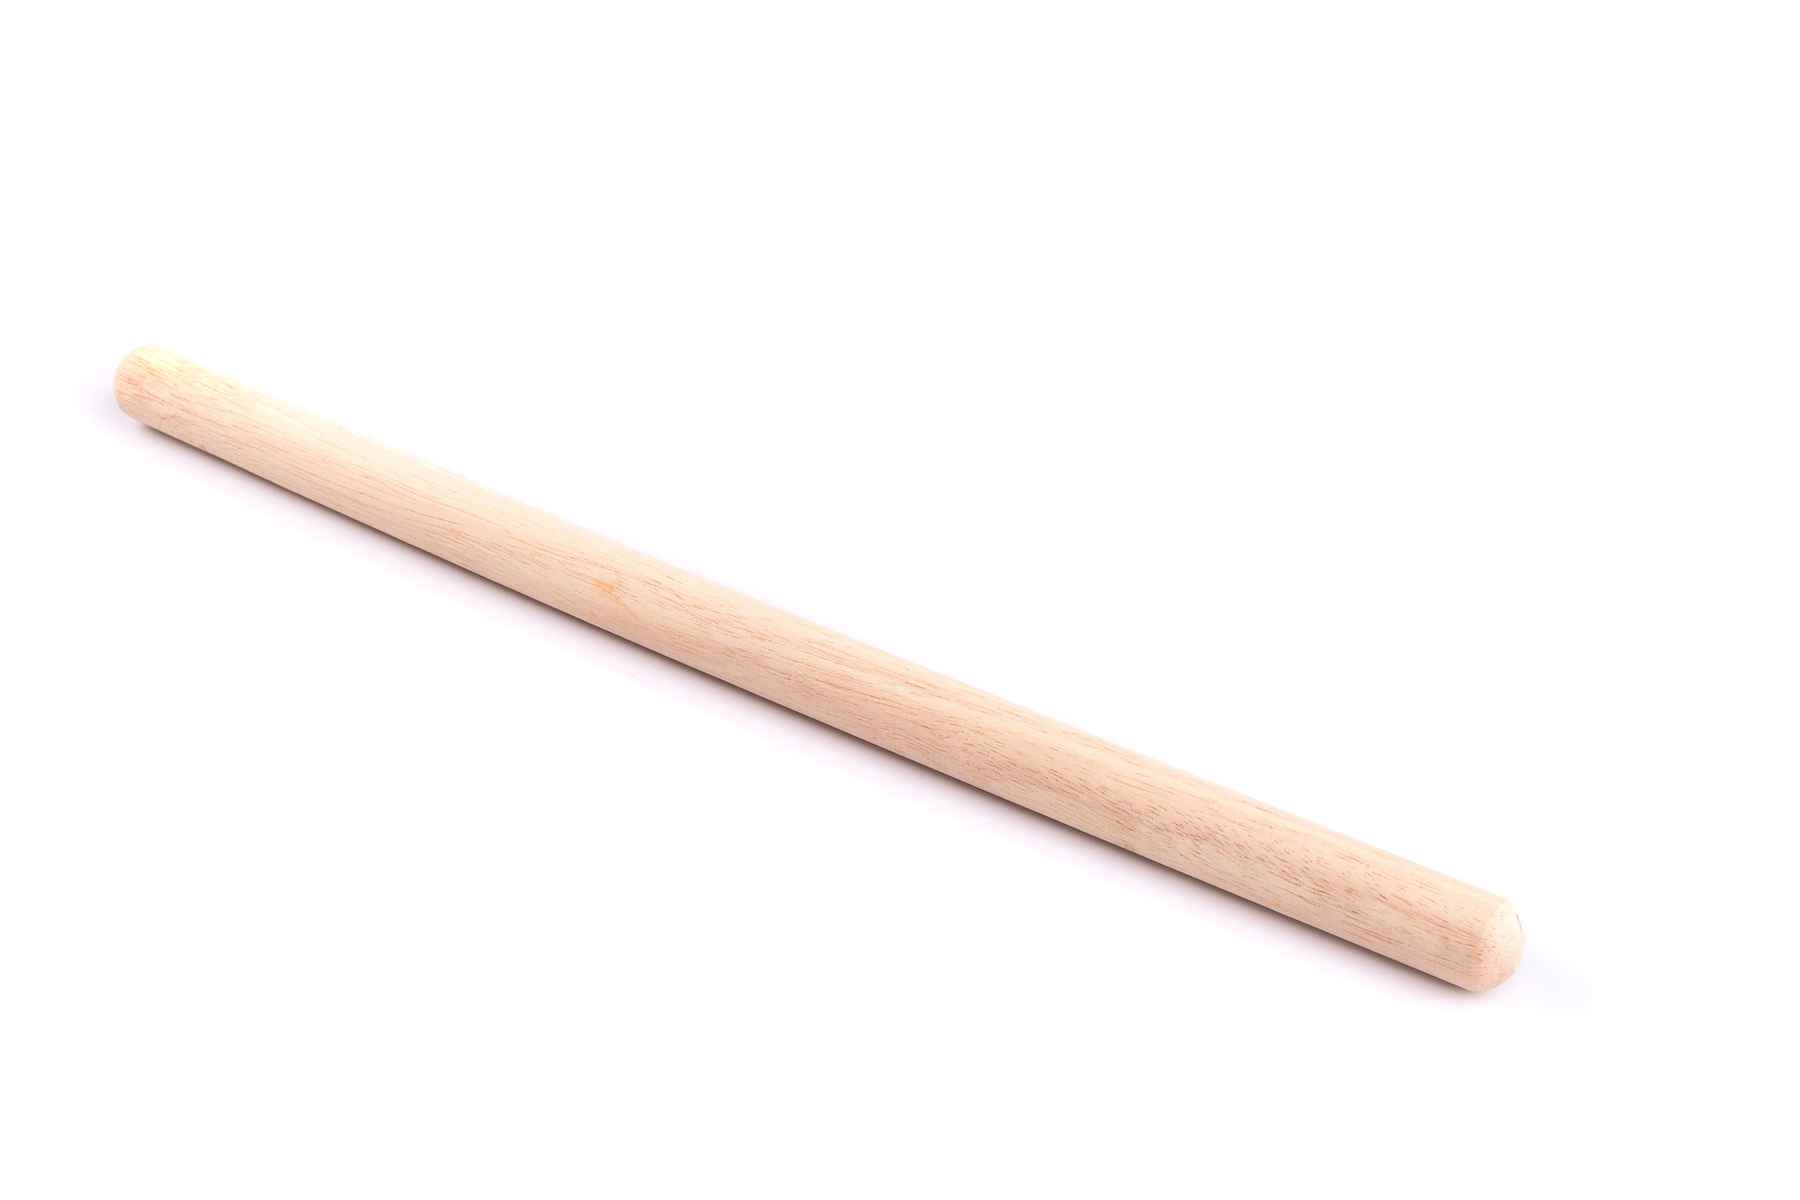 Wooden stick isolated against white background. Favorite kitchen tools.